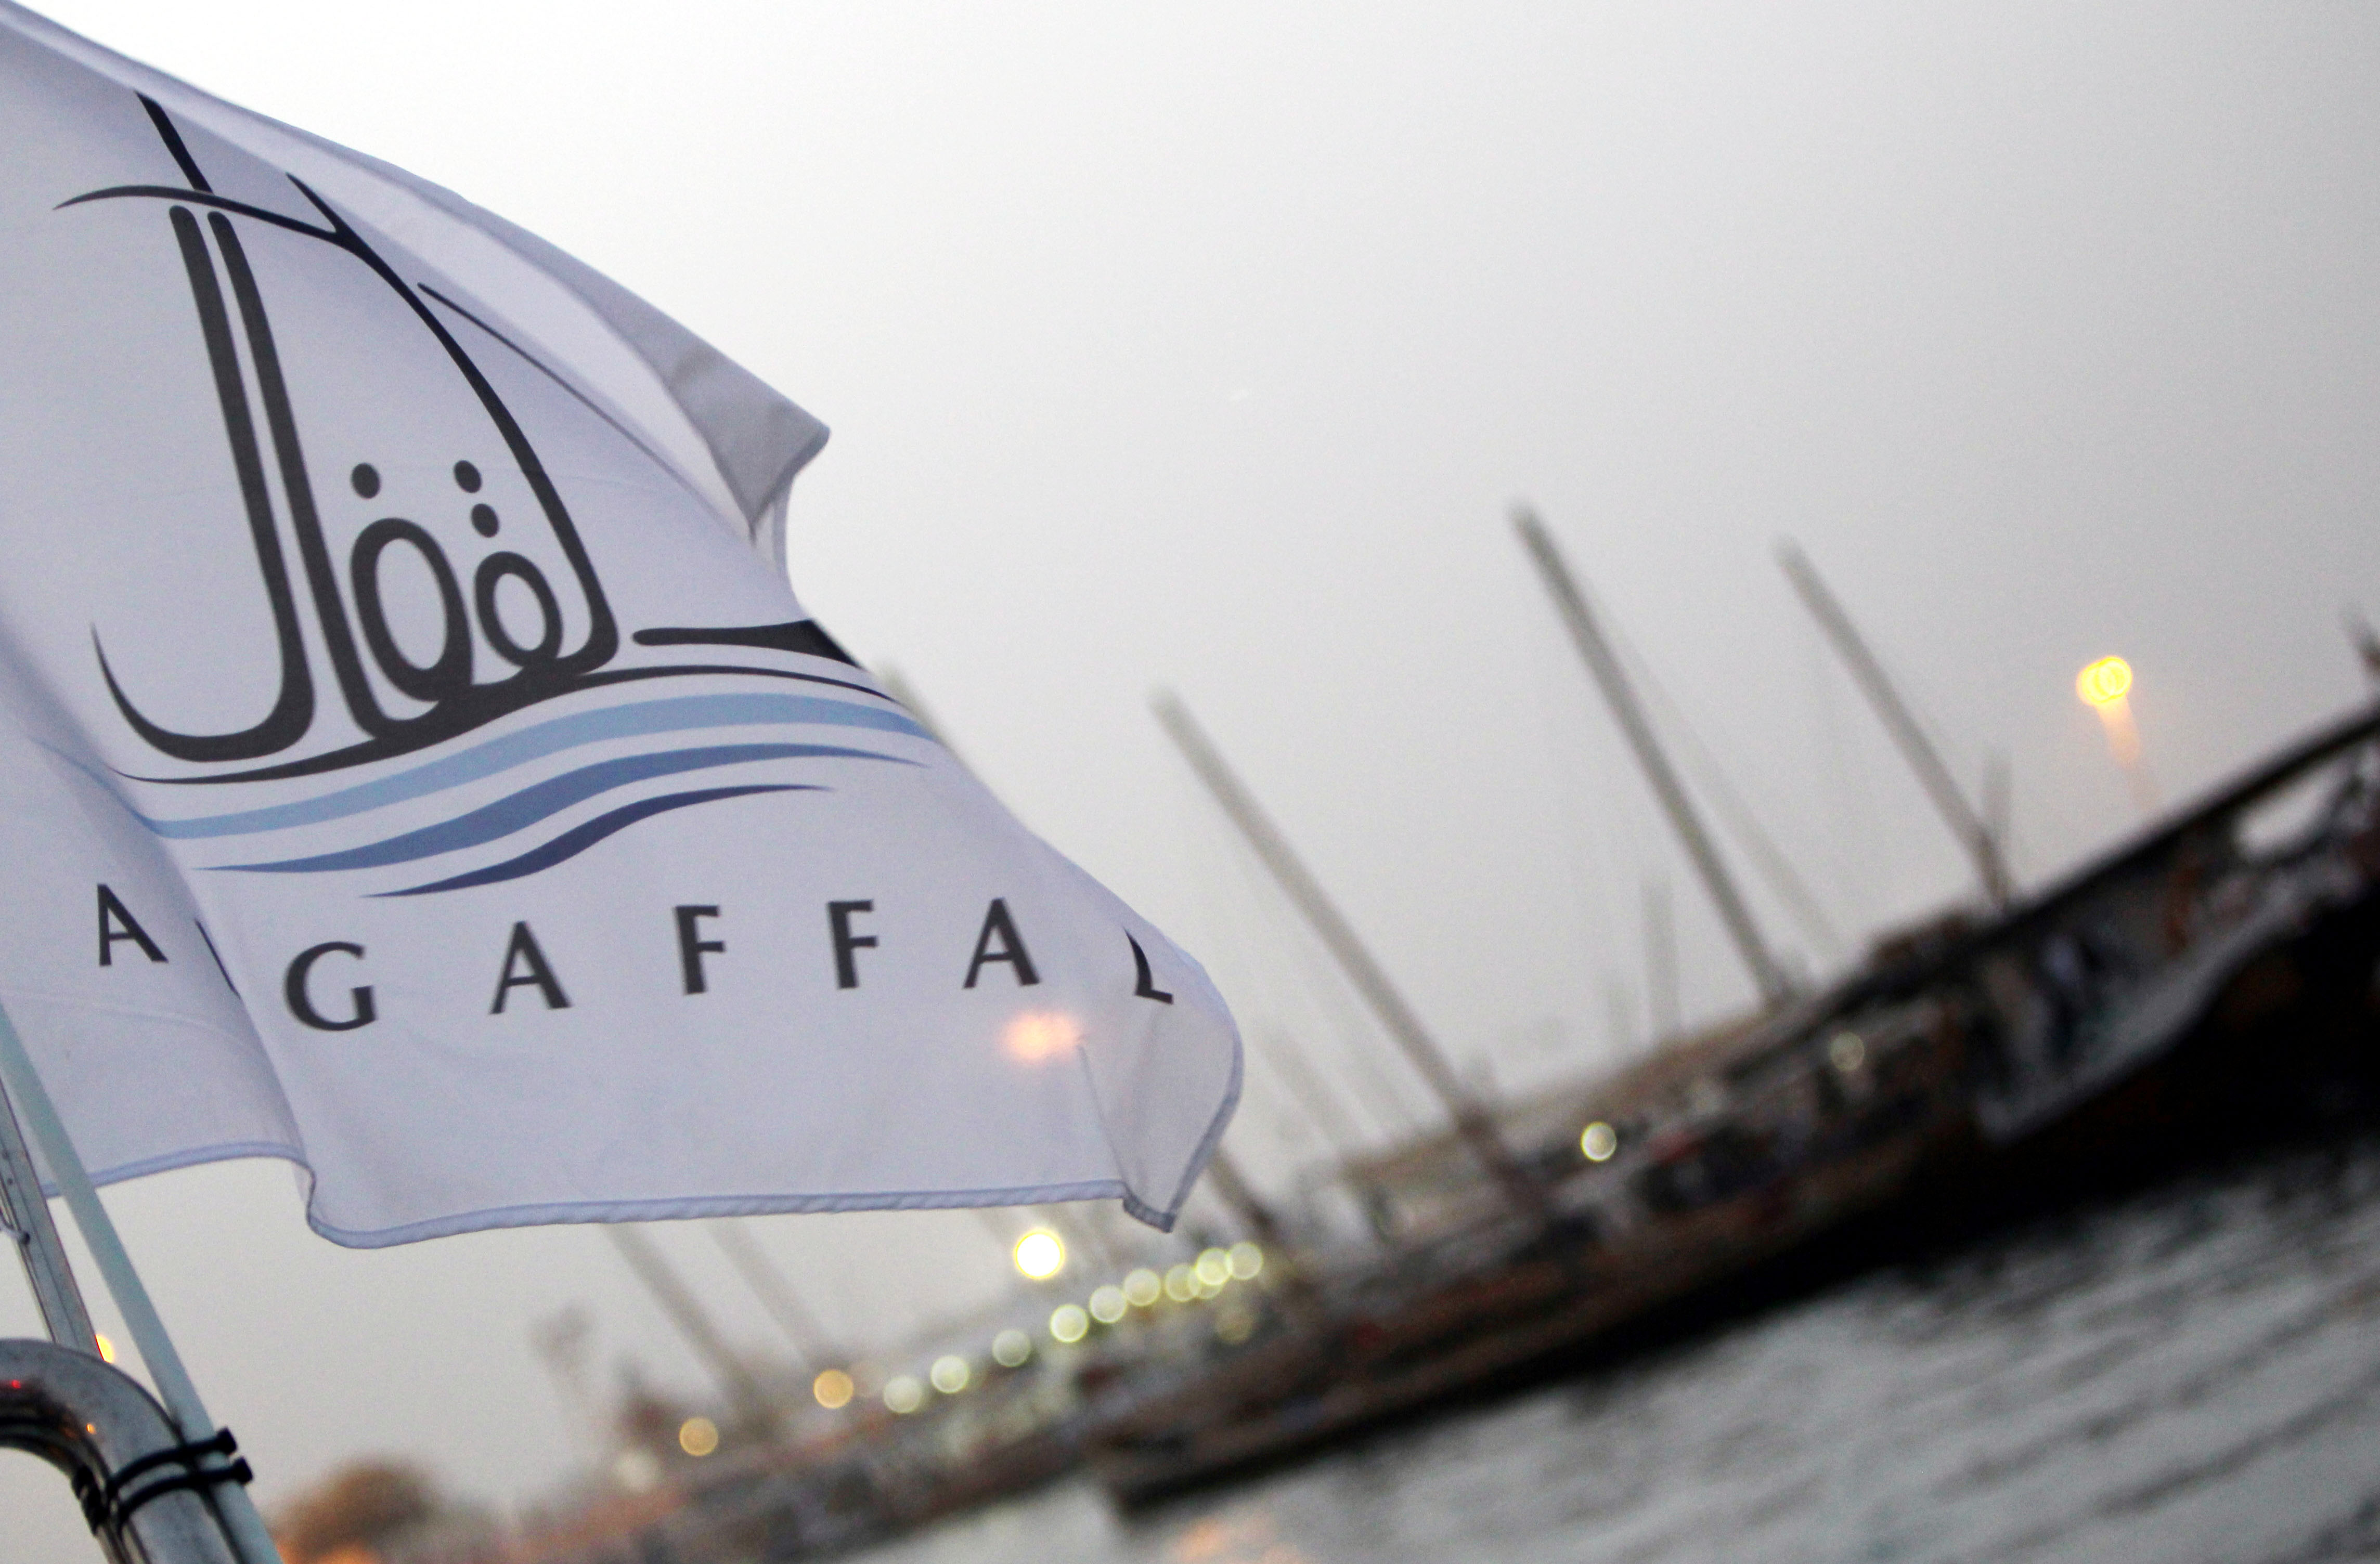 24 hours to the start of the #AlGaffal 30 race